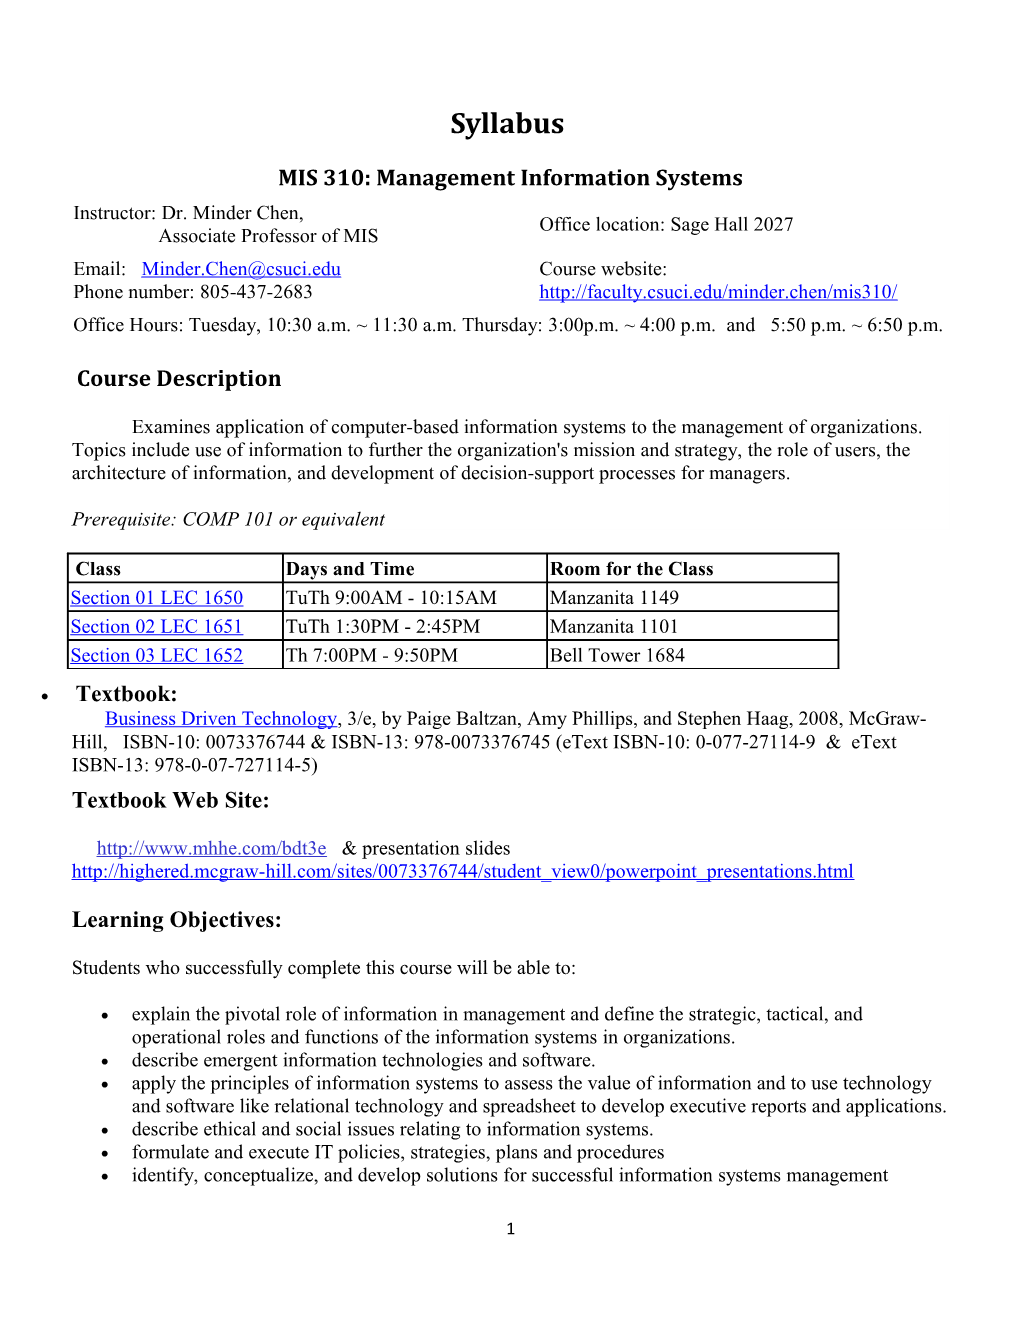 MIS 310: Management Information Systems